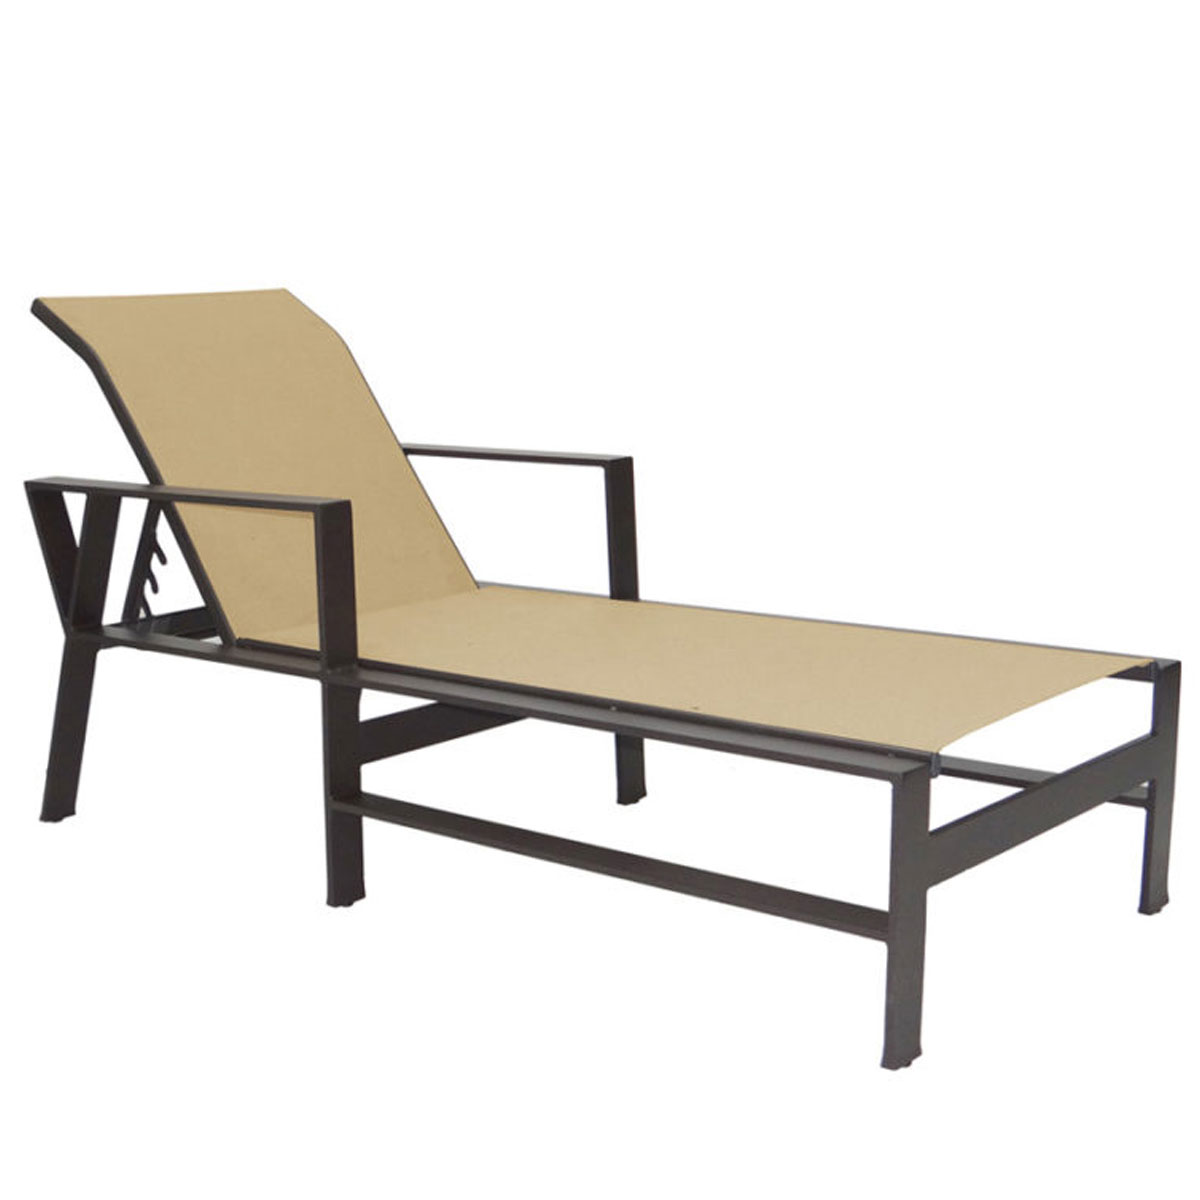 Castelle Trento Sling Chaise Lounge